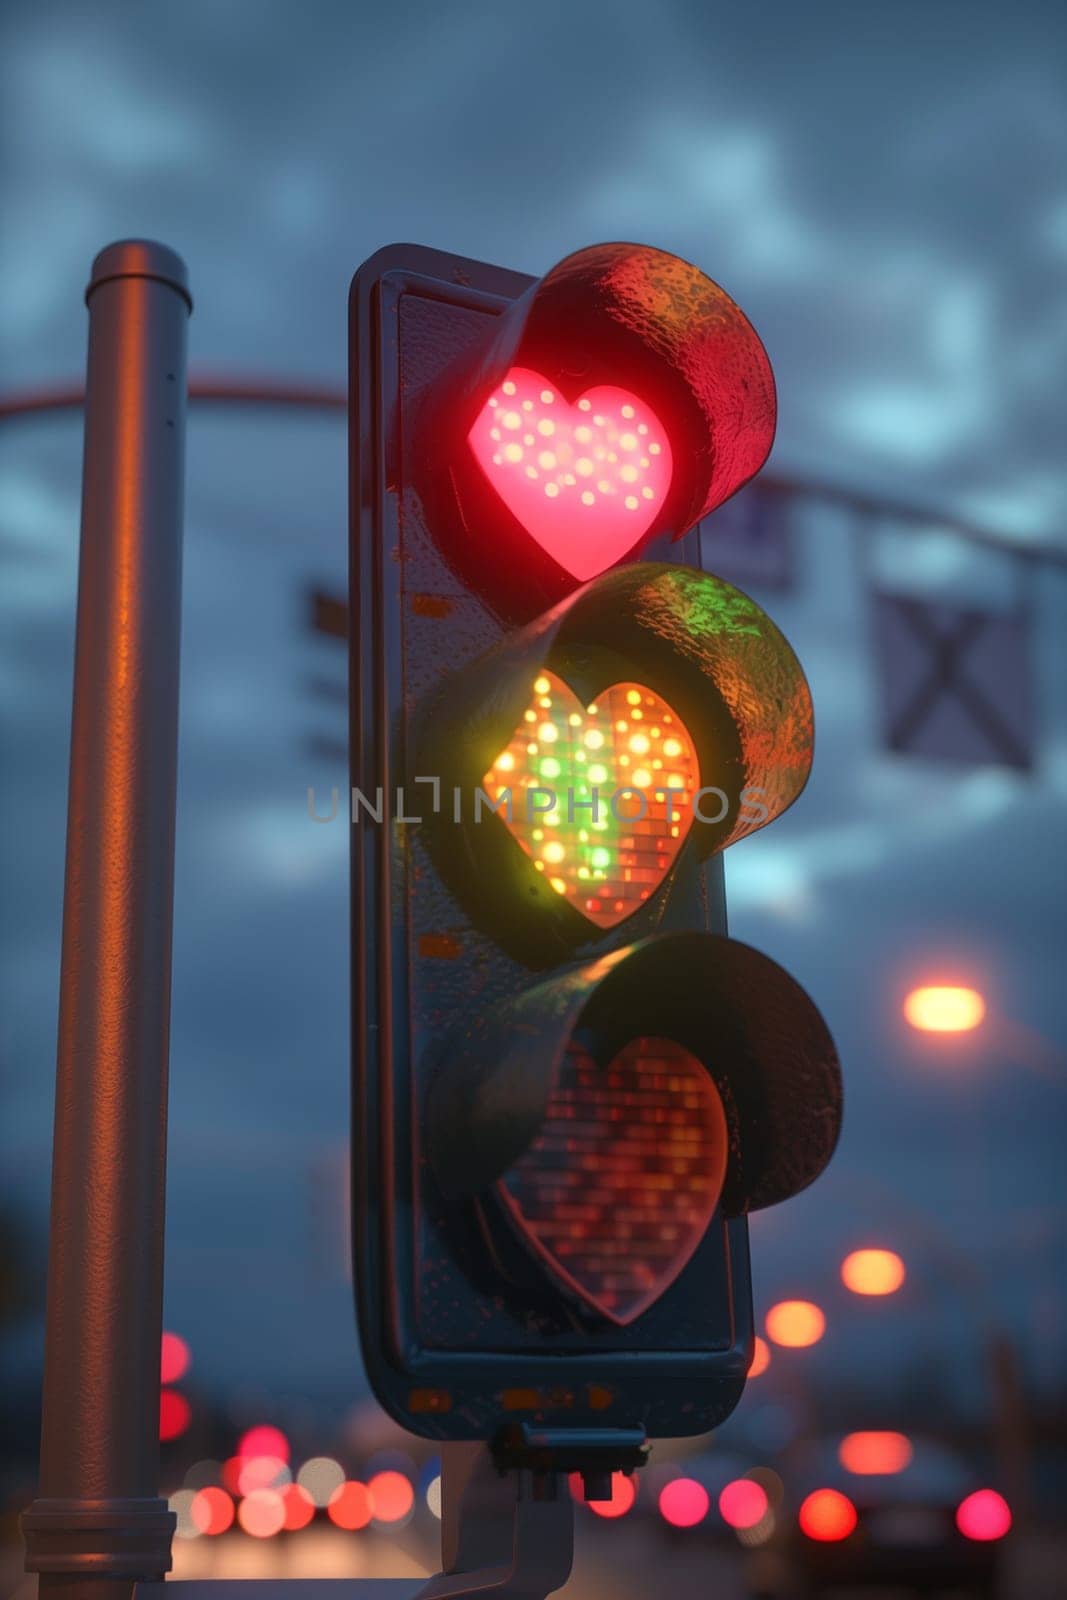 A regular traffic light displaying a heart symbol in place of a traditional light signal.